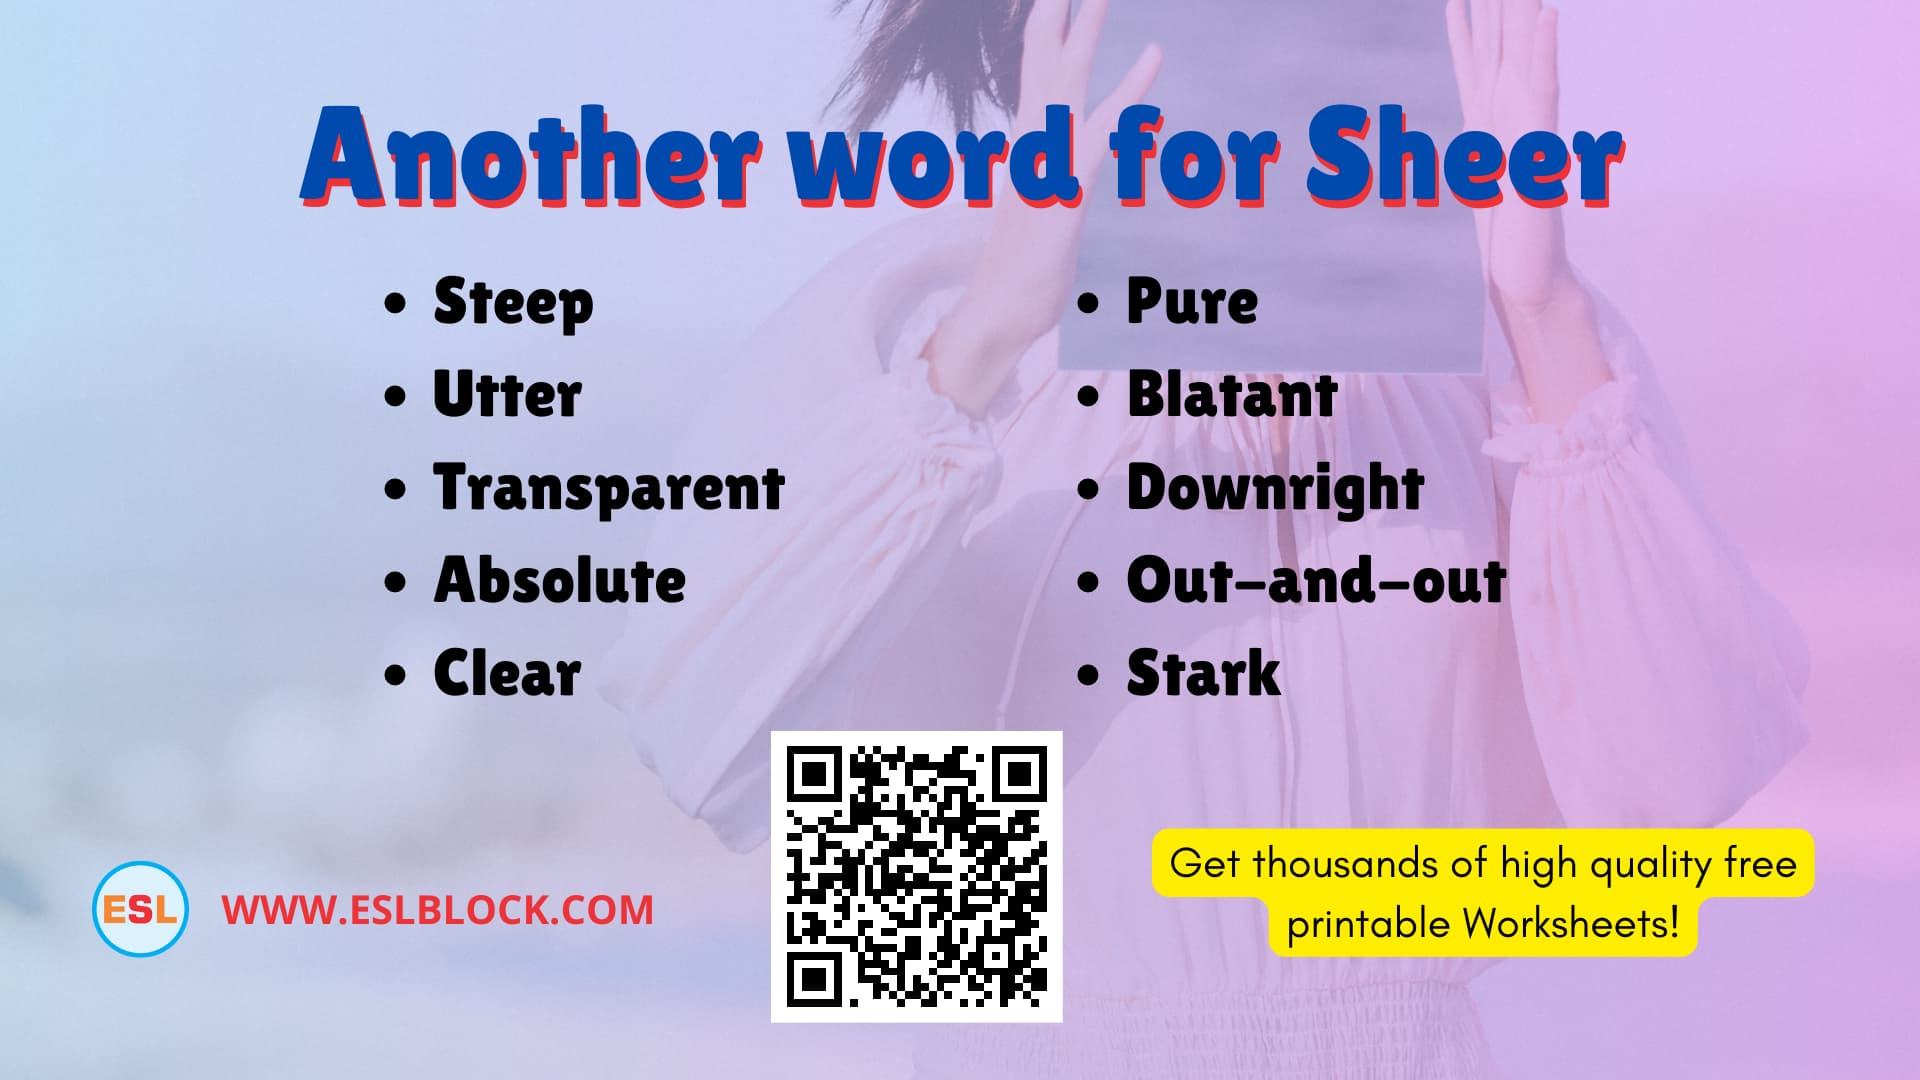 What is another word for Sheer